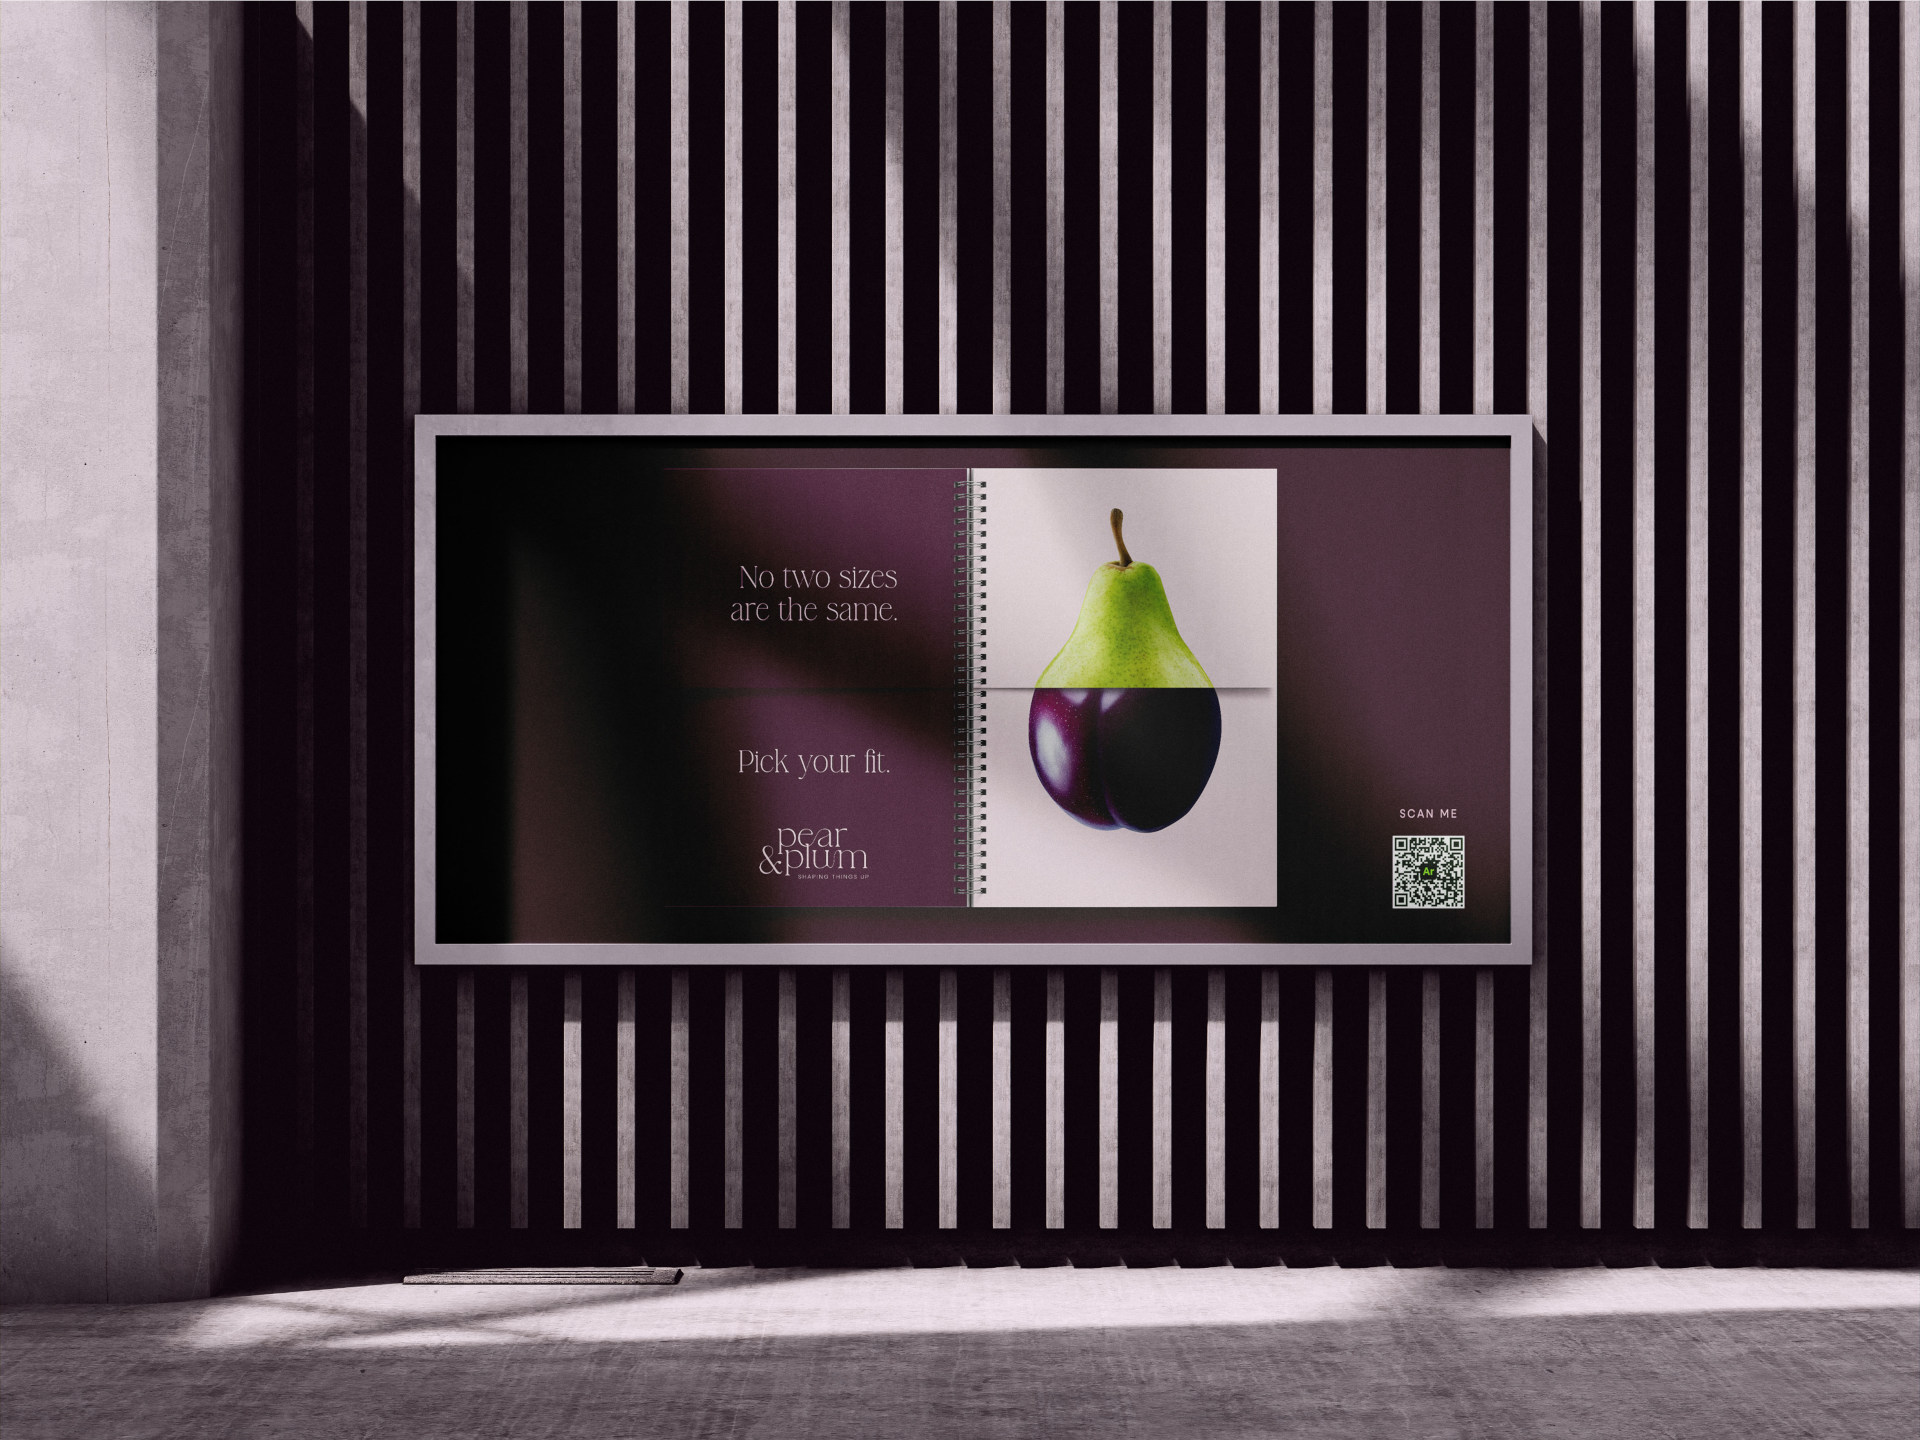 Billboard design with Pear & Plum branding and image